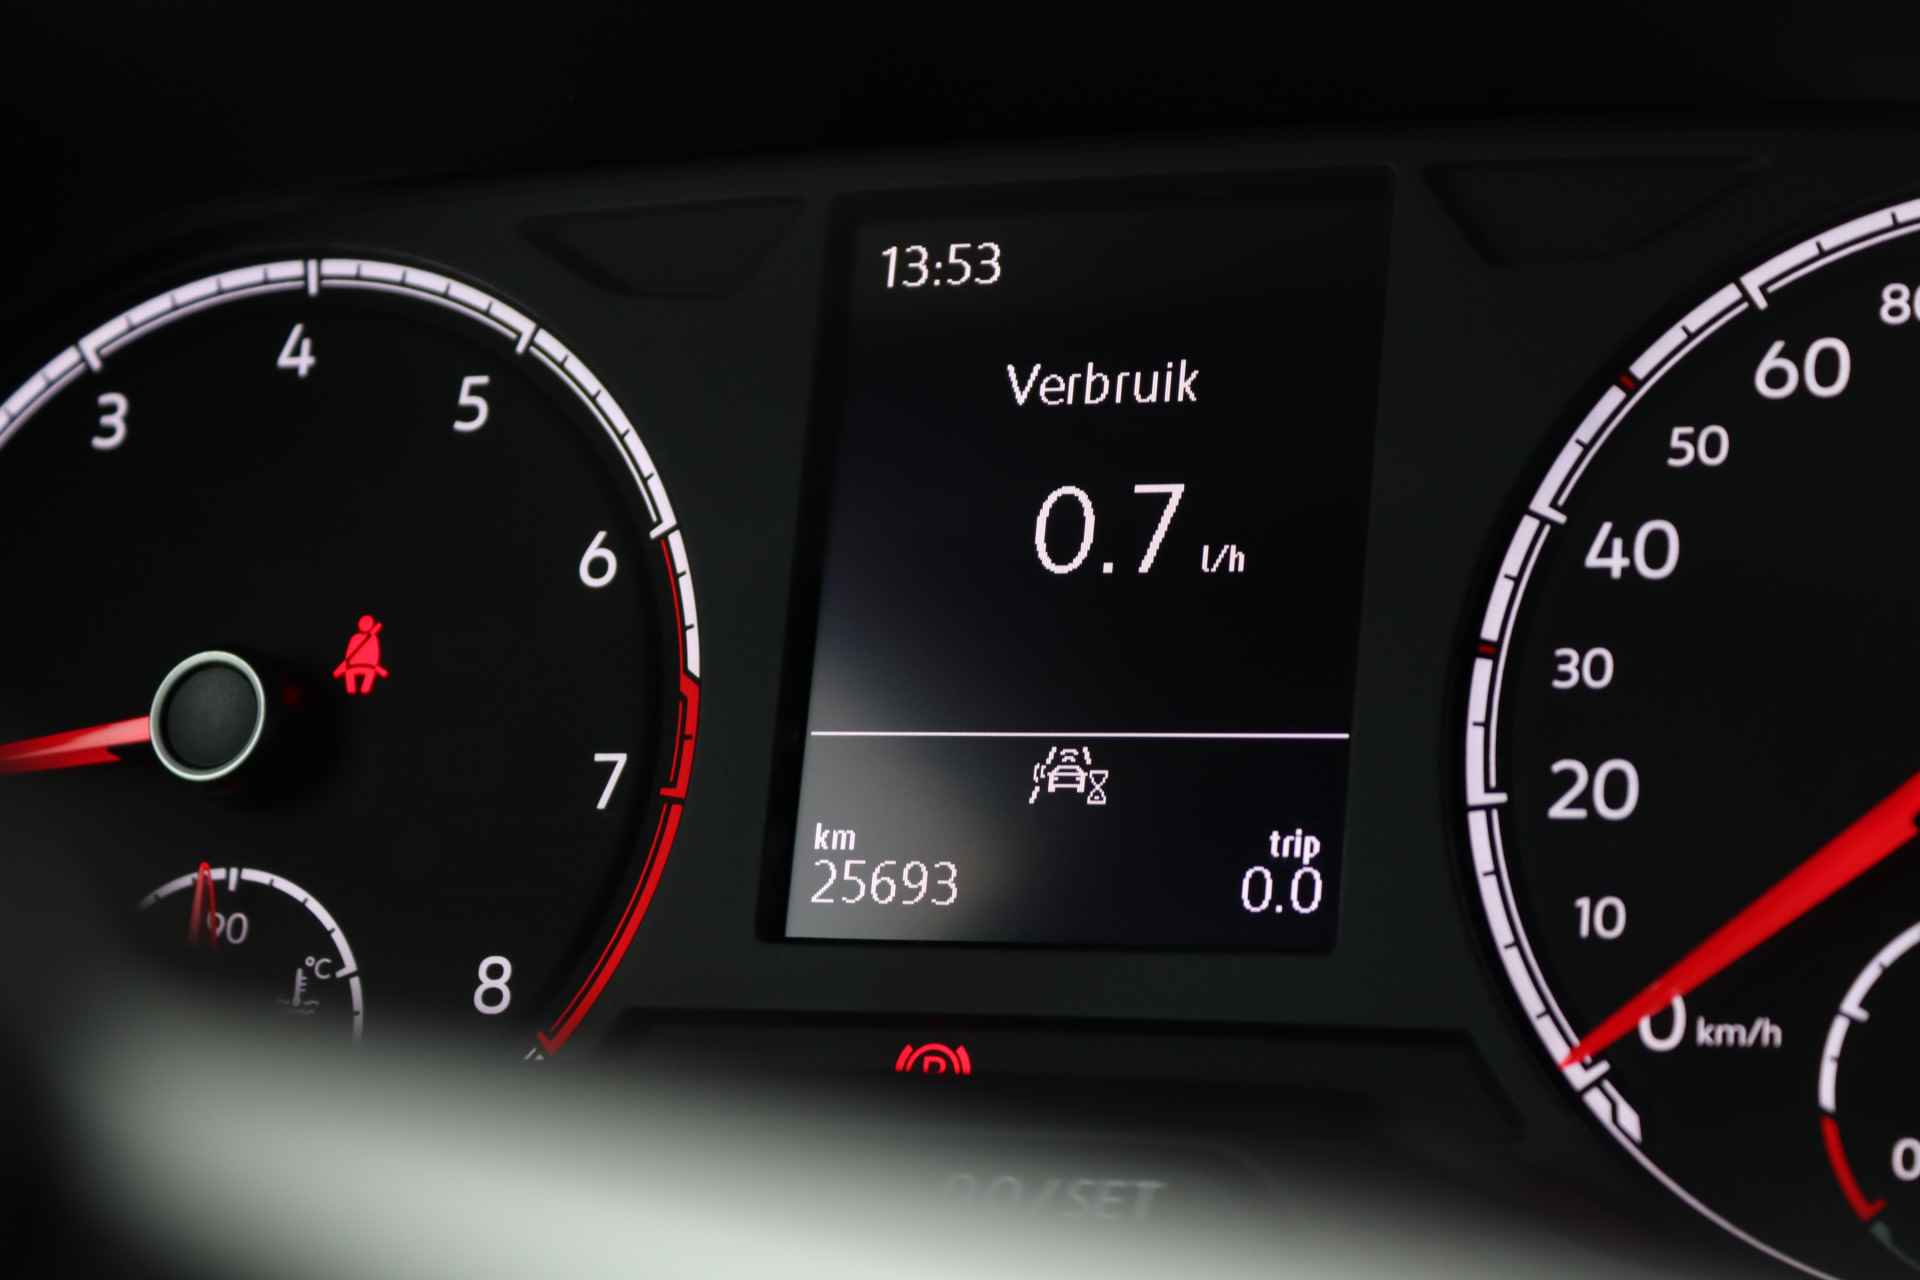 Volkswagen T-Cross 1.0 TSI 95pk Life | App-connect  | PDC voor & achter | 16" LM | Adaptive Cruise - 20/38